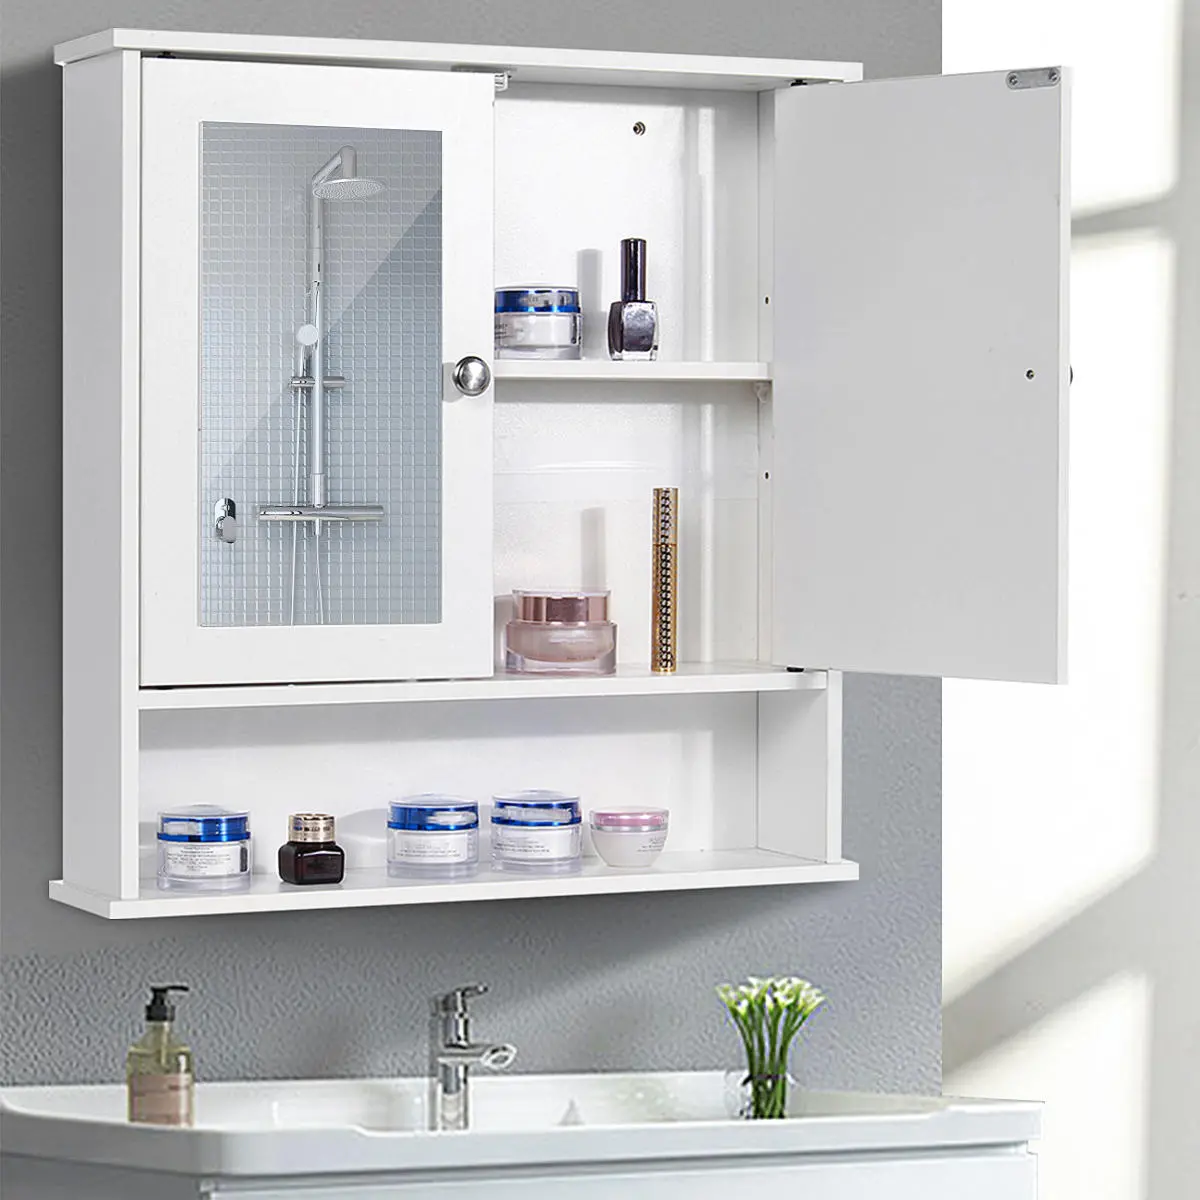 Privmedi Wall-mounted Hanging Bathroom Cabinet Household Storage Cabinet With Mirrors Two Half Doors Design